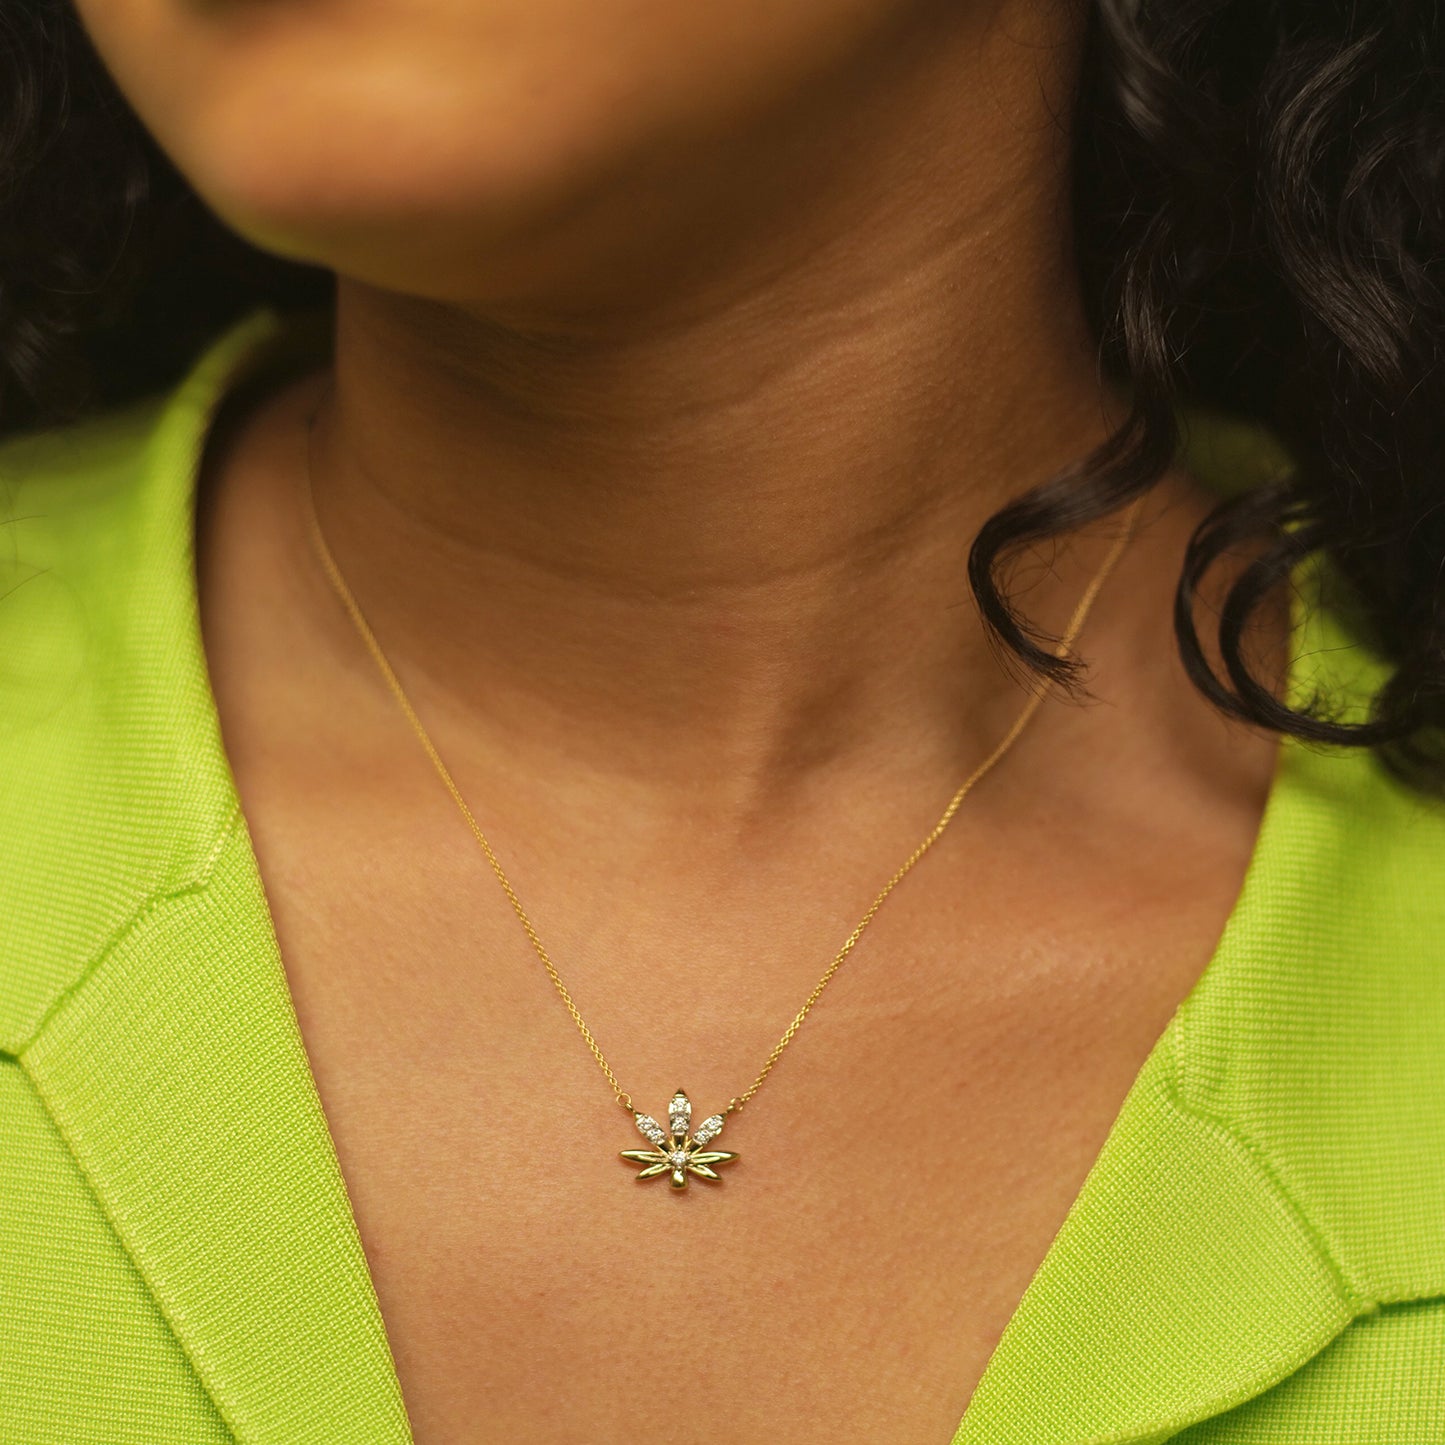 Mary Jane Diamond Leaf Necklace With Gold Chain In Lady's Neck